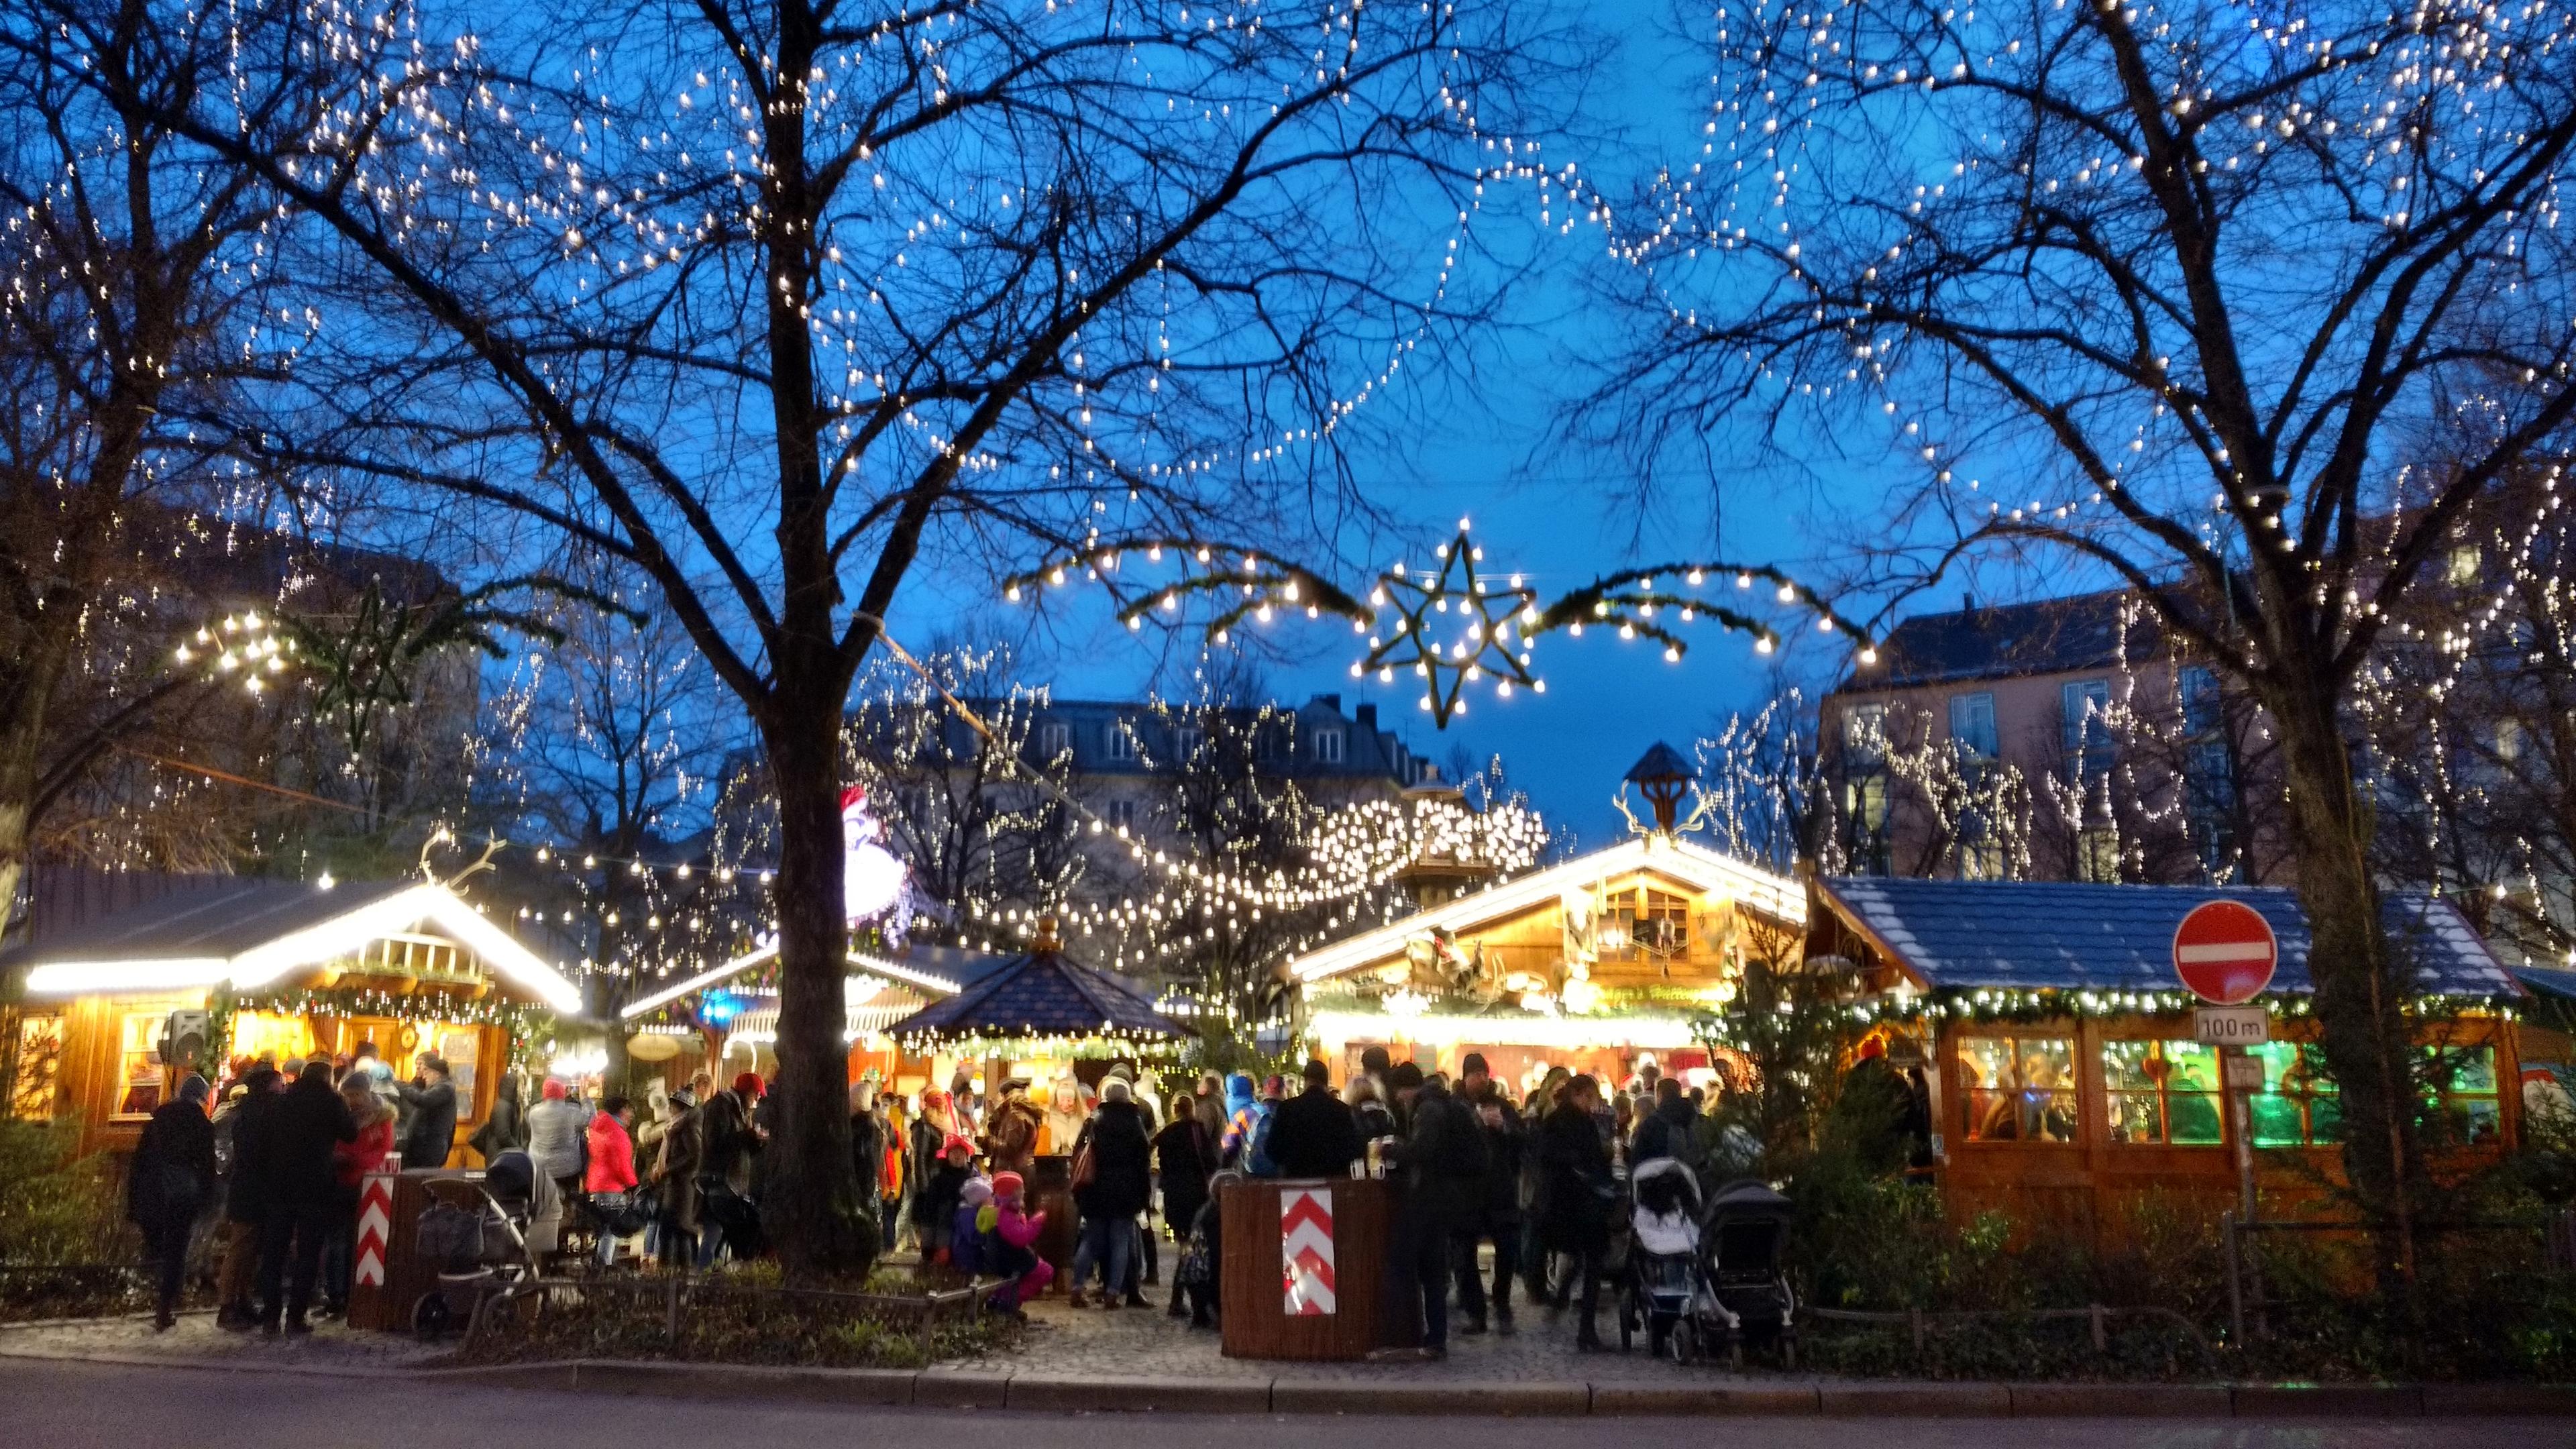 Cover image of this place Weißenburger Platz Christmas Market